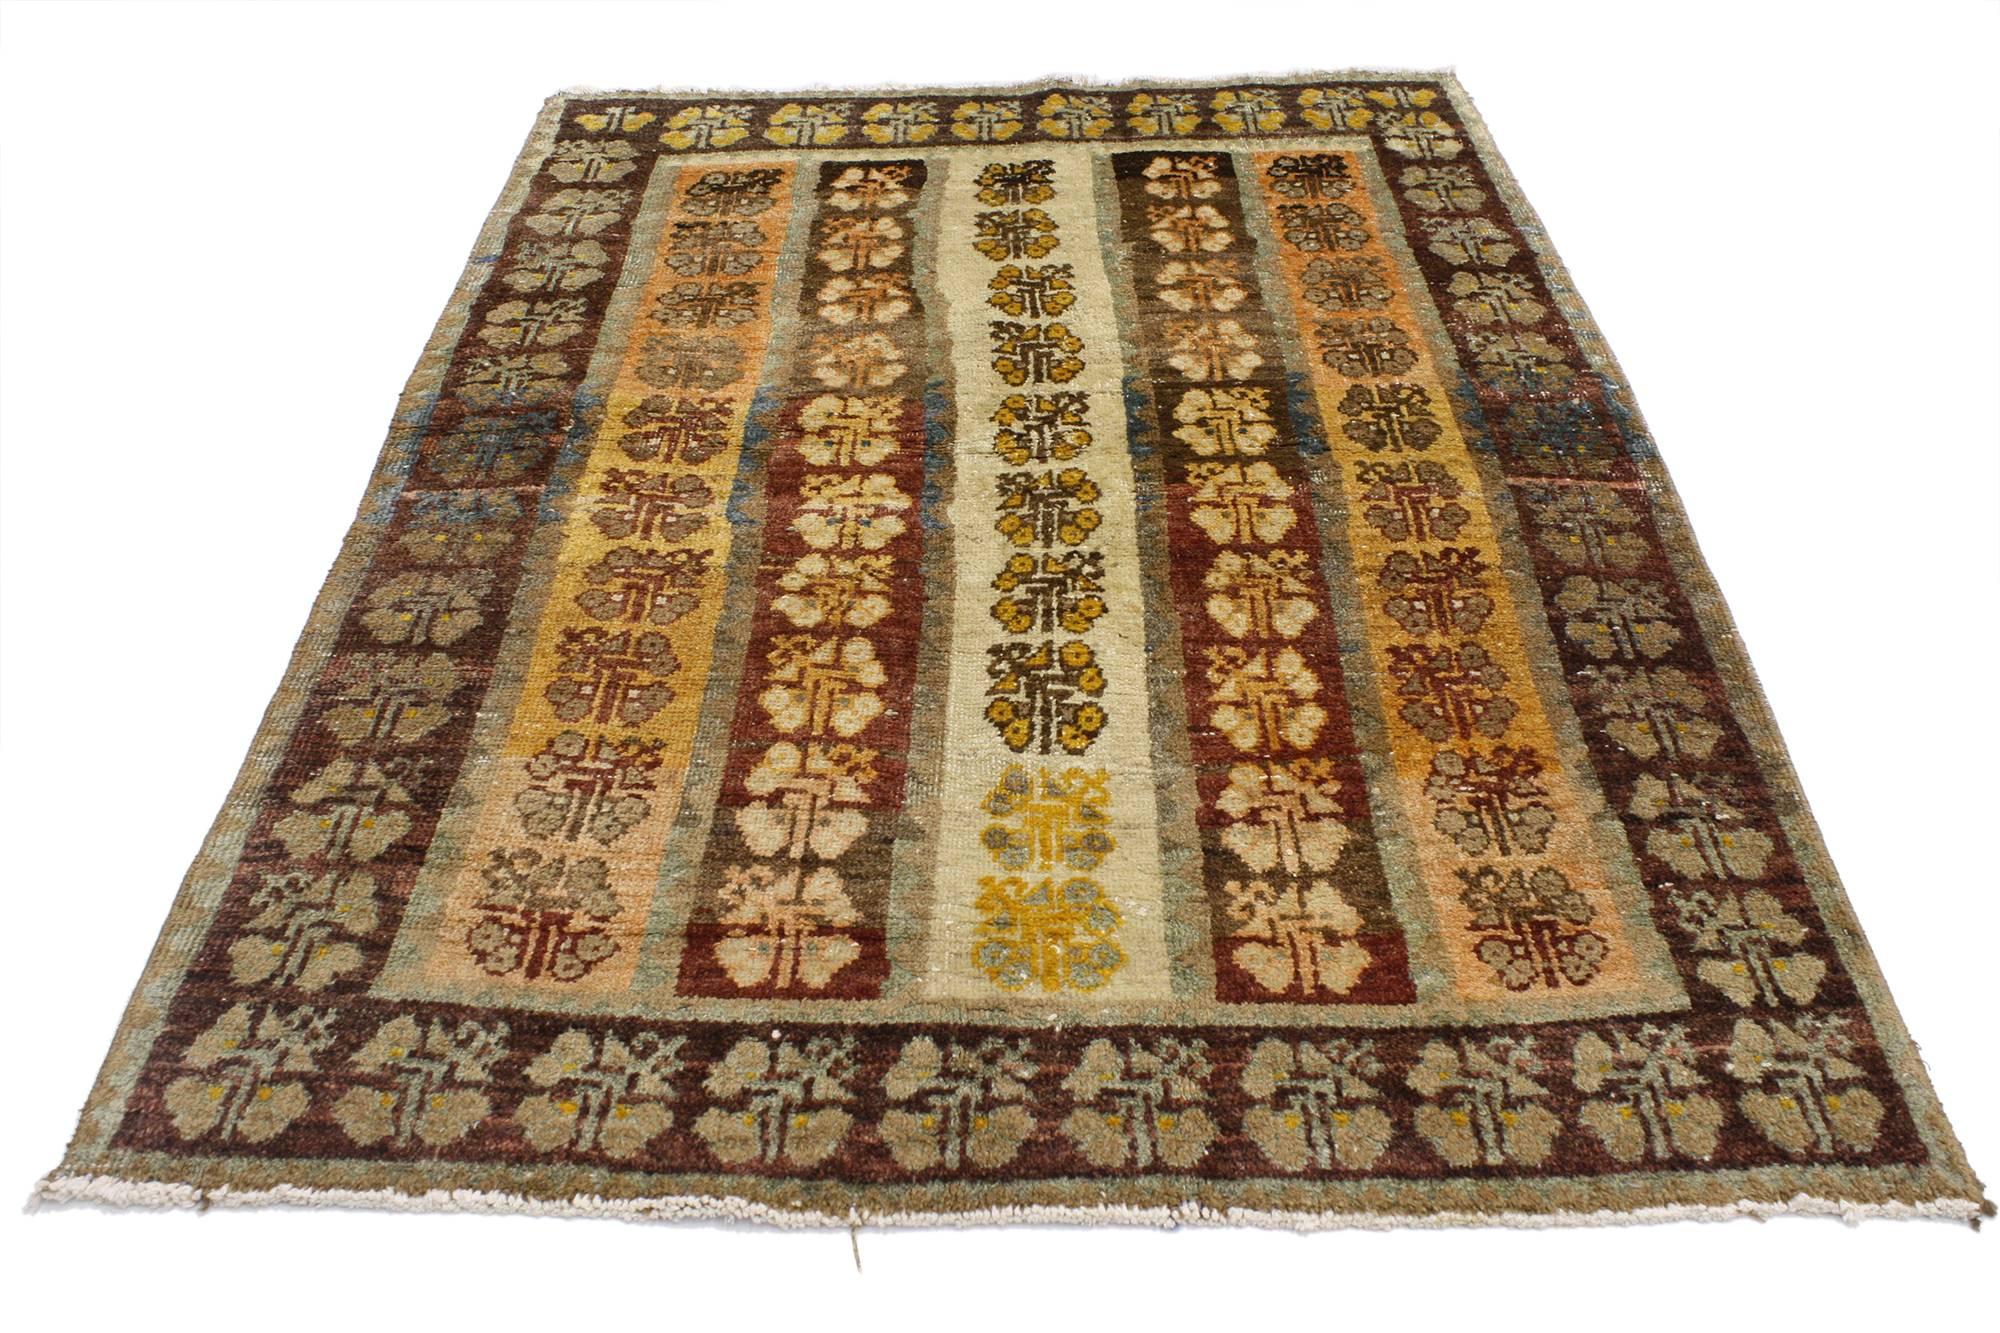 52103, vintage Turkish Oushak accent rug, entry or foyer rug with Arts & Crafts style. This hand knotted wool vintage Turkish Oushak rug features a paneled design with large repeated floral bouquets. The bouquets are arranged in five vertical